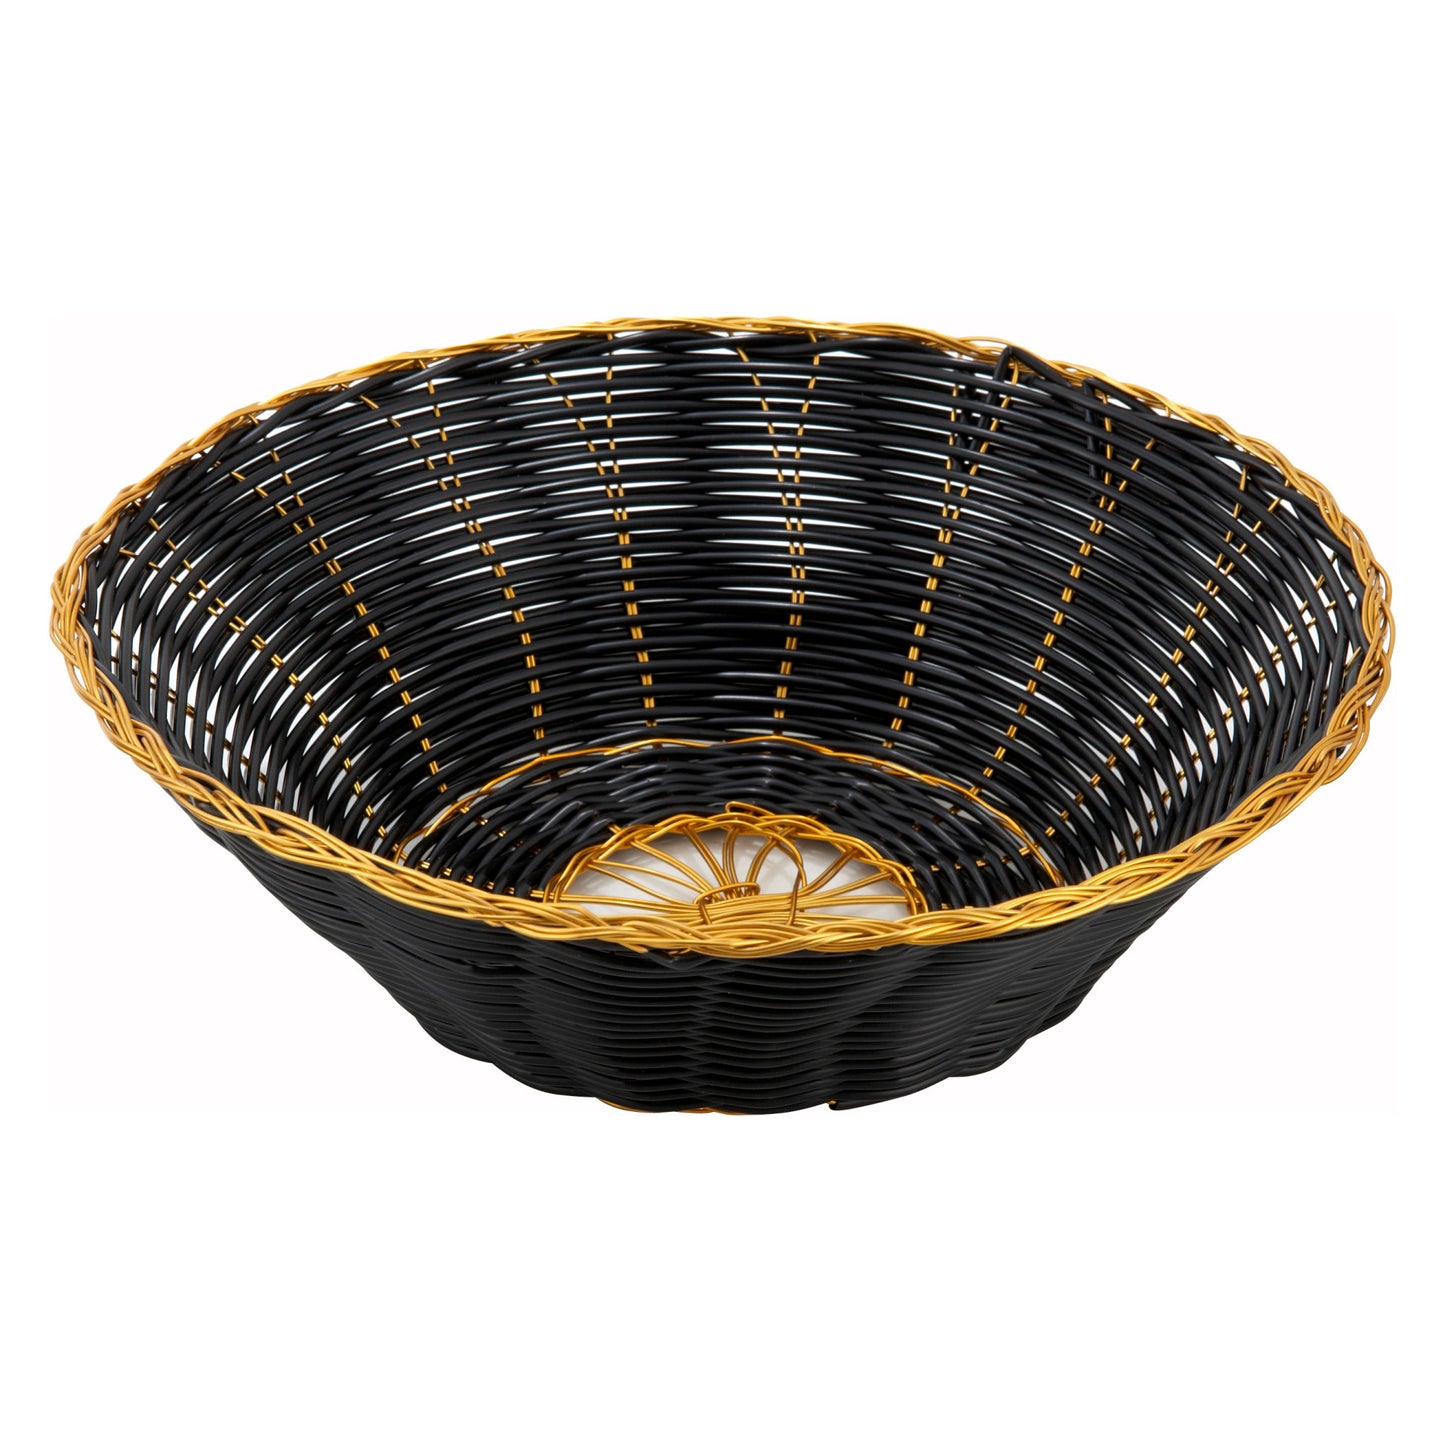 PWBK-8R - Black and Gold Poly Woven Basket - Round